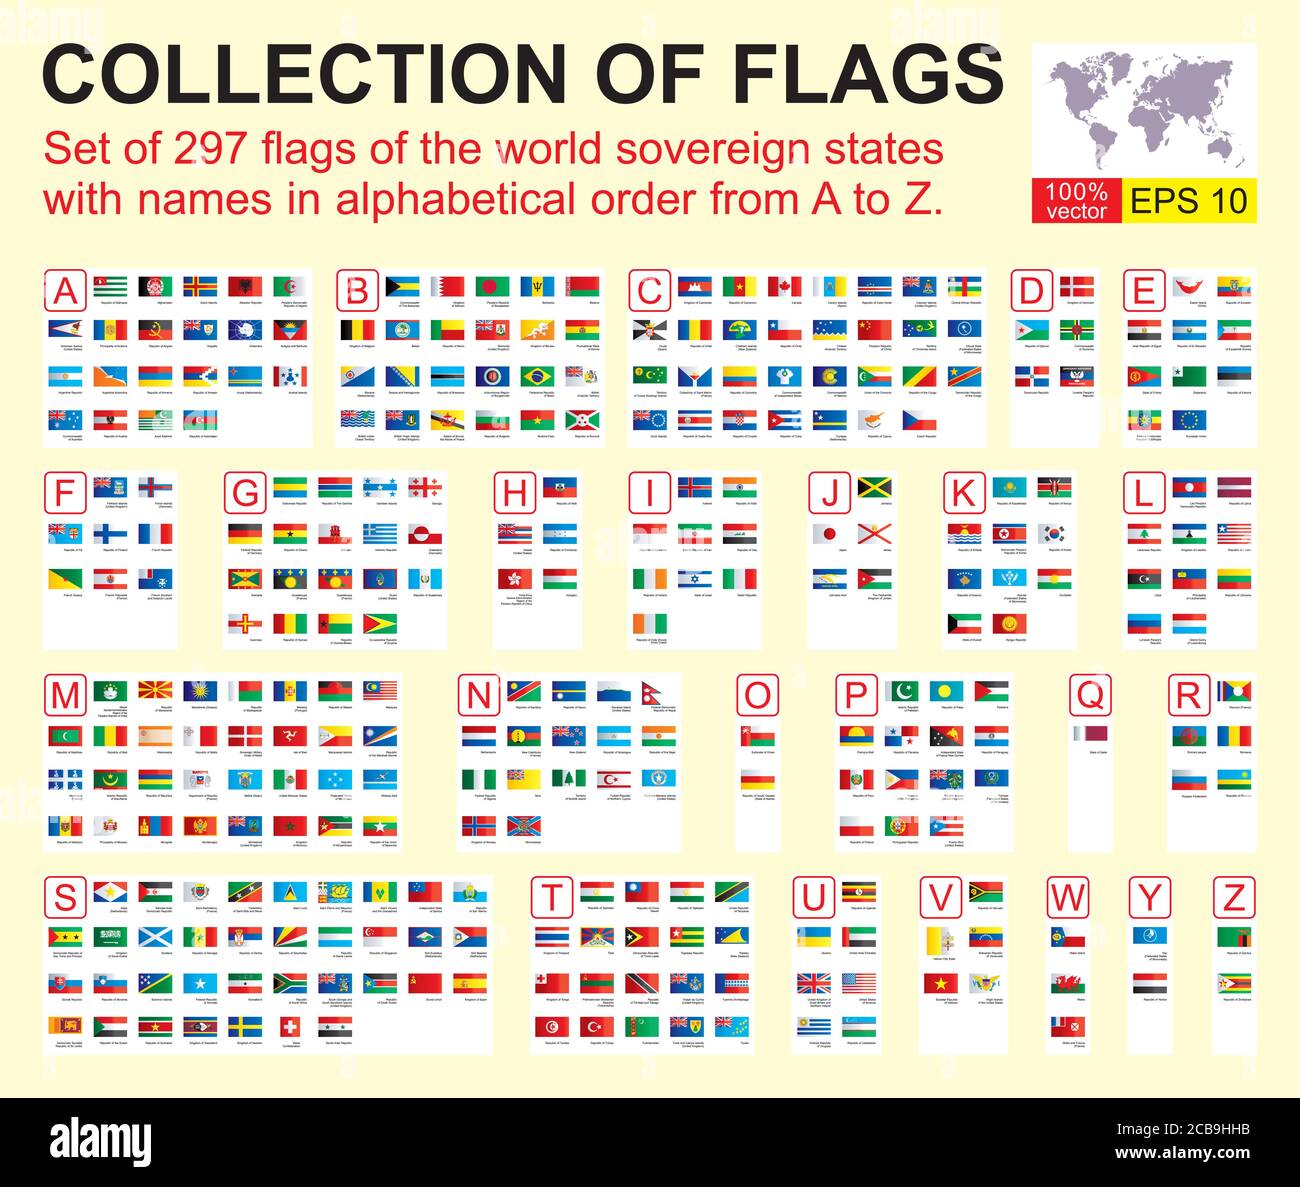 Set Of 297 Flags Of The World Sovereign States With Names In Alphabetical Order From A To Z Vector Illustration Stock Vector Image Art Alamy